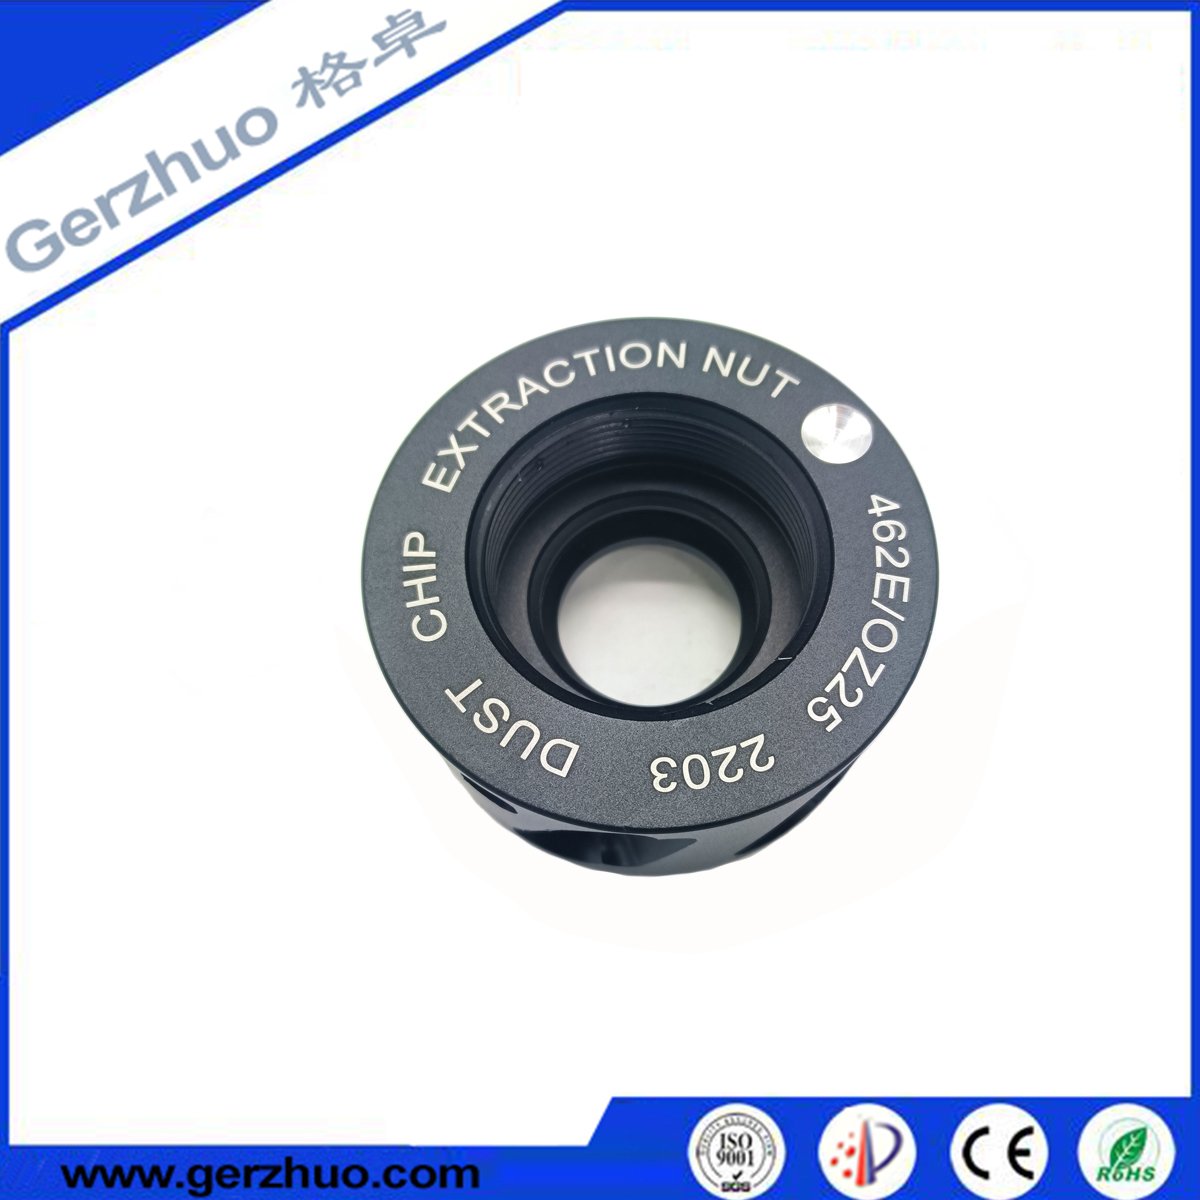 Dust Chip Extraction Nut